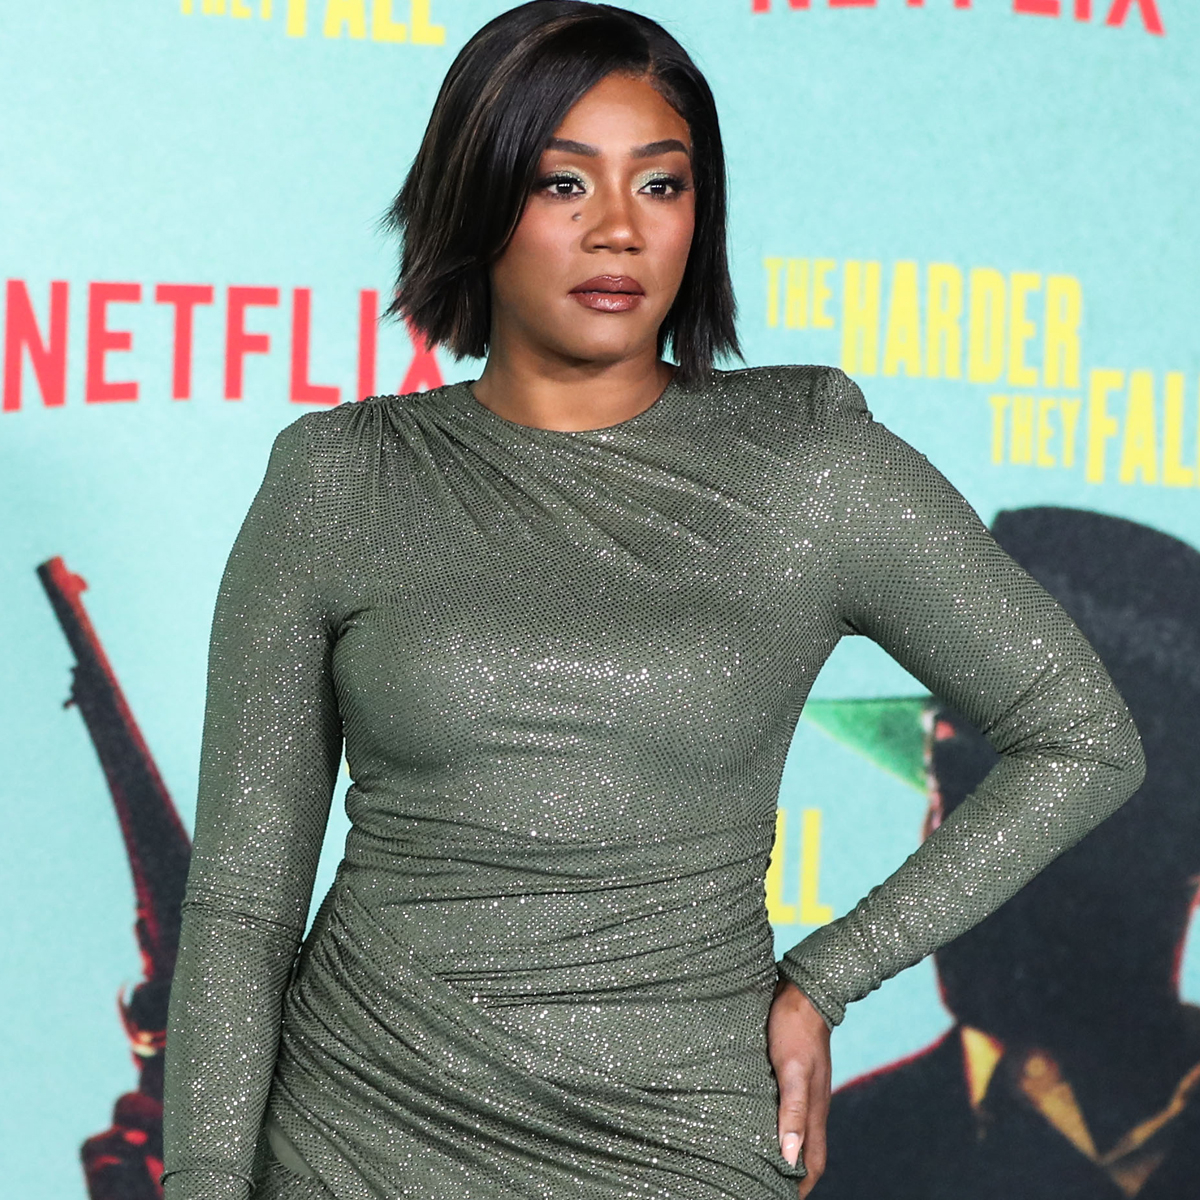 Tiffany Haddish Arrested for DUI After Allegedly Falling Asleep at the Wheel